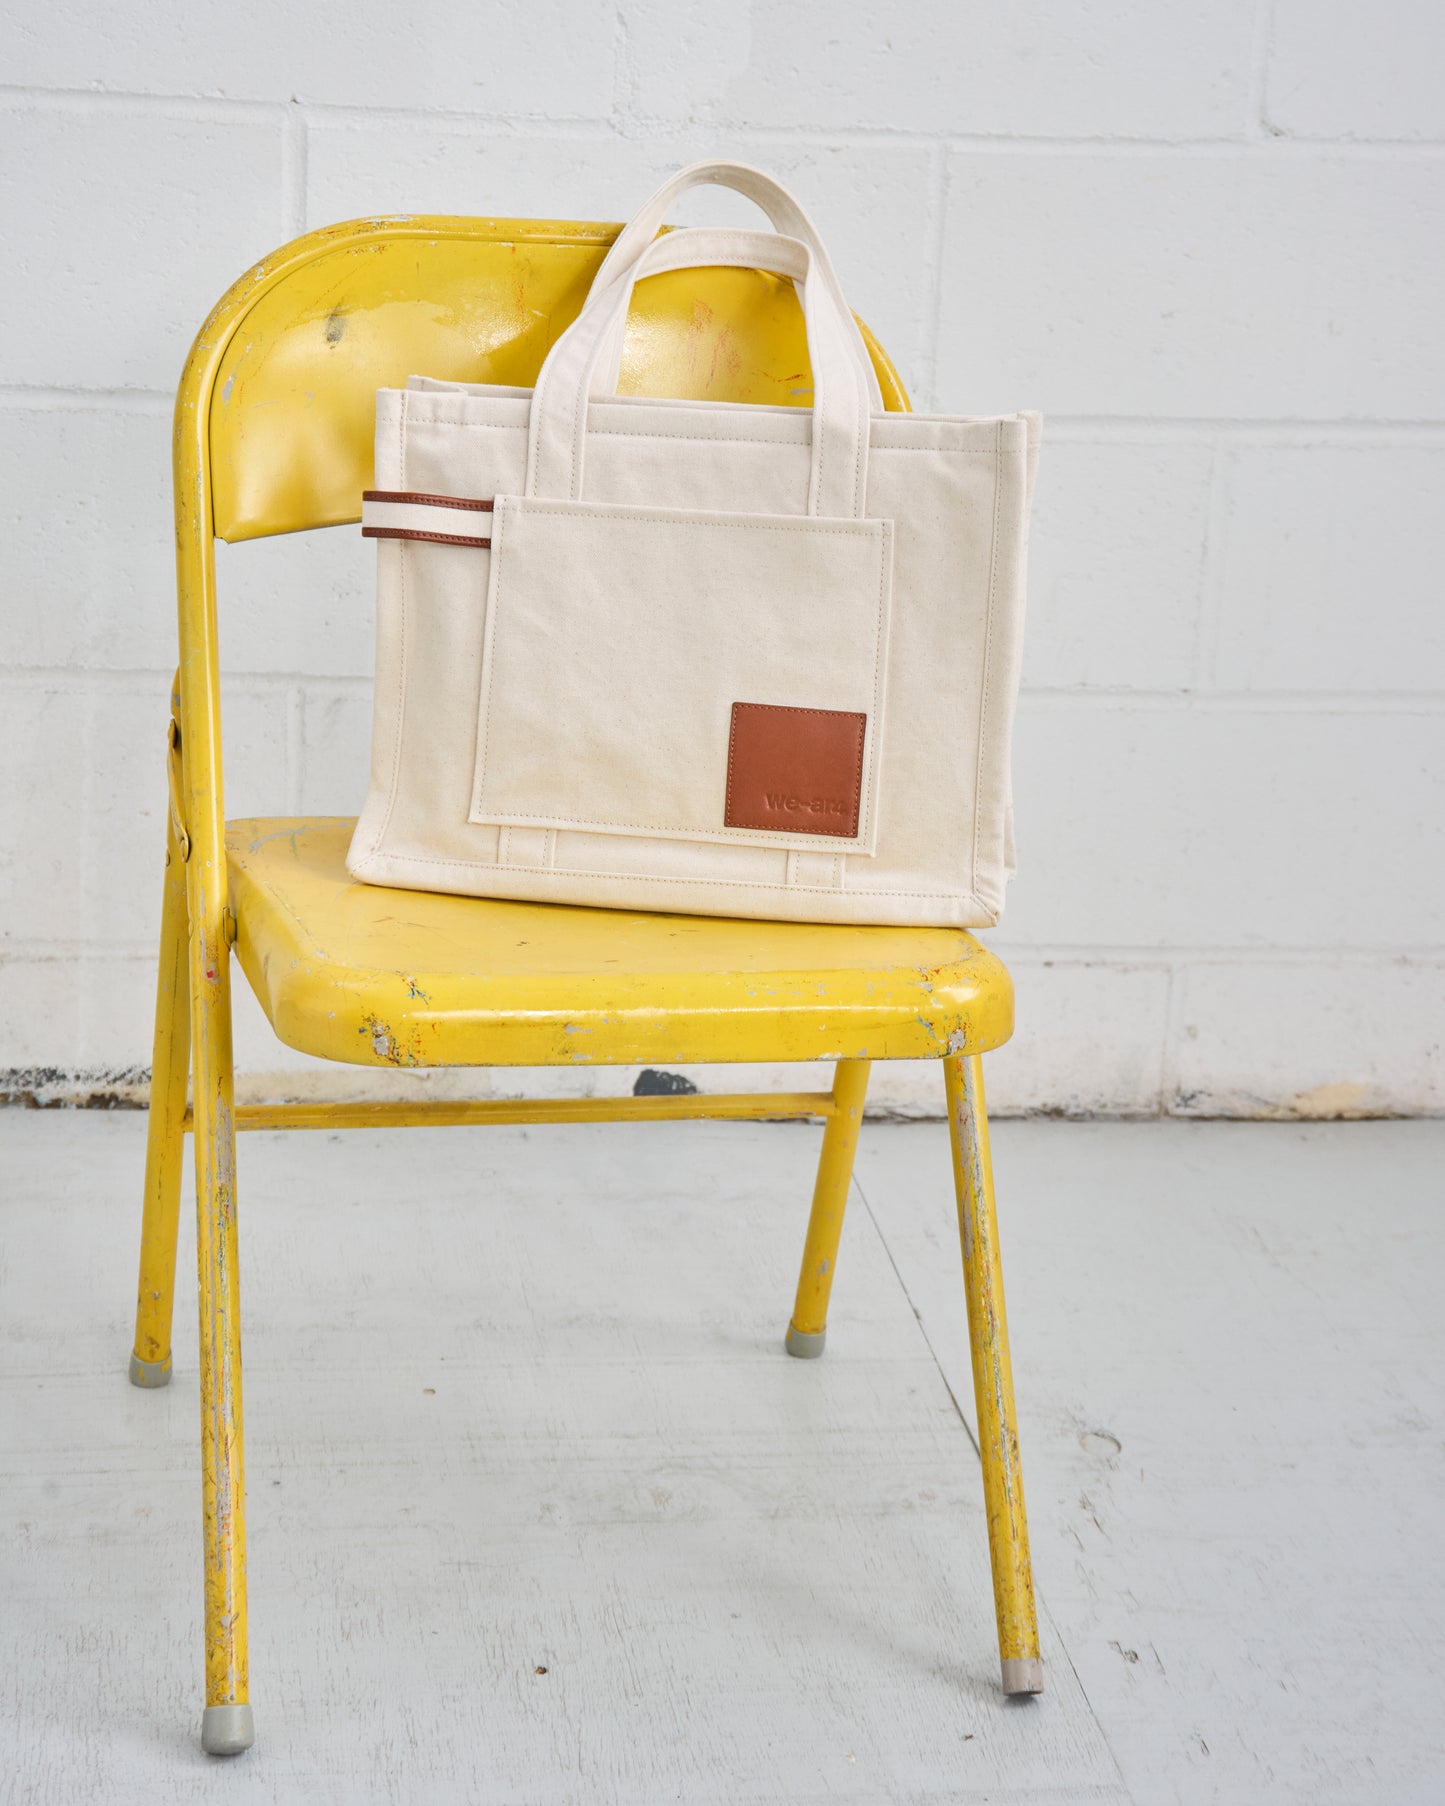 The Street Tote